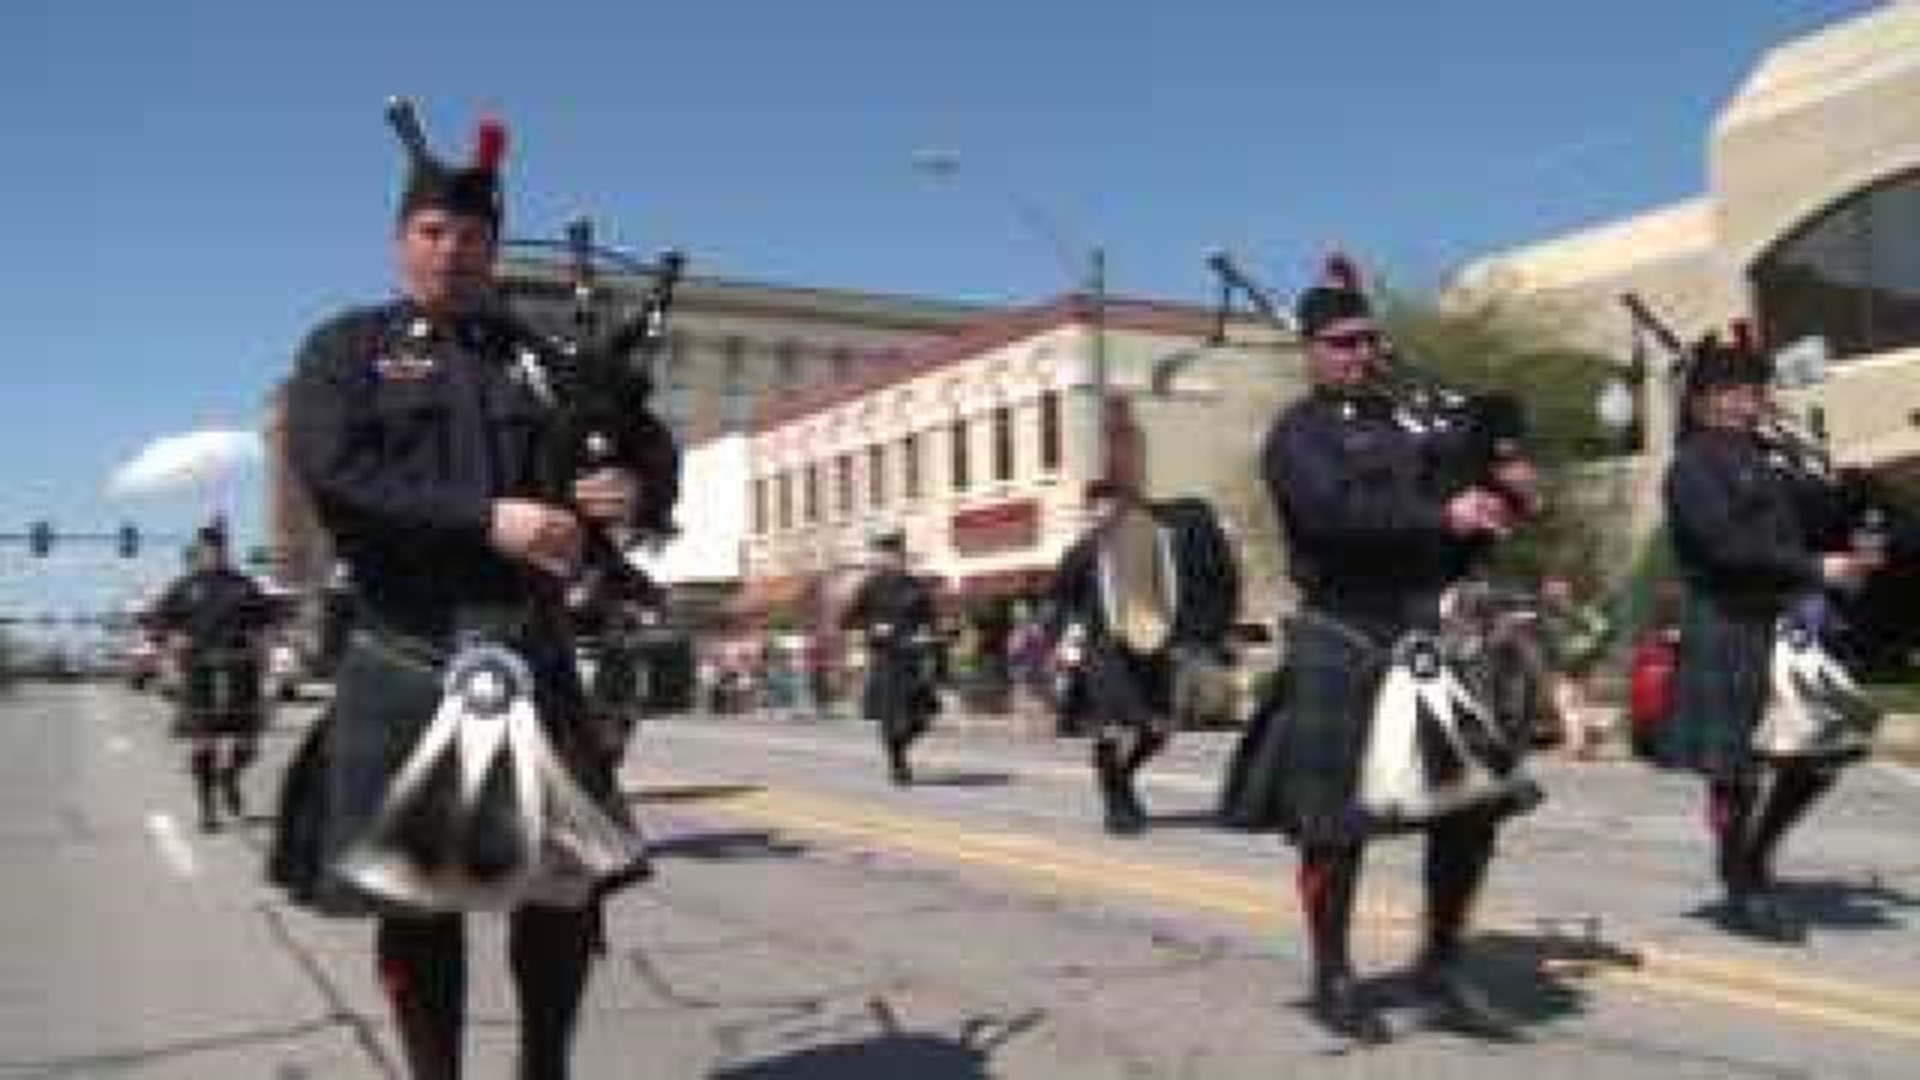 Fort Smith Celebrates St. Patrick's Day Downtown